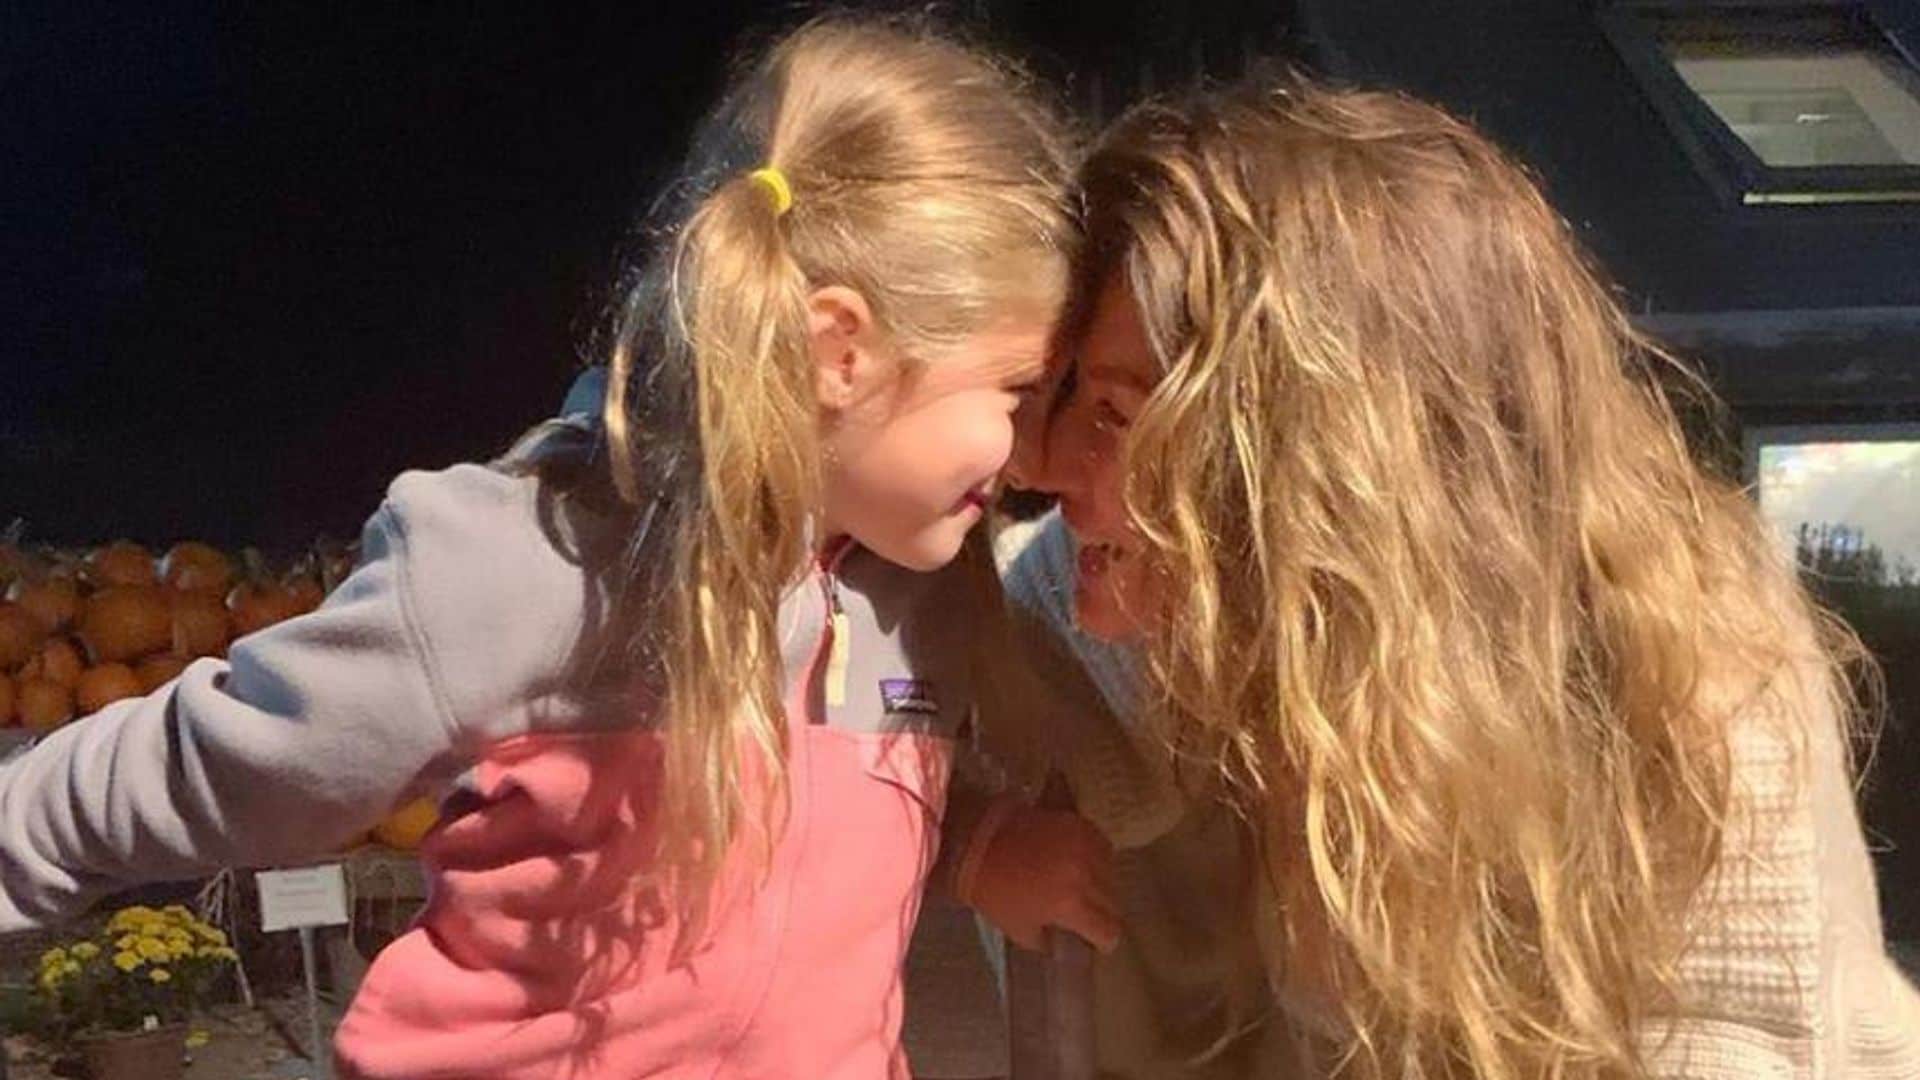 Gisele Bündchen is identical to her daughter Vivian in adorable throwback